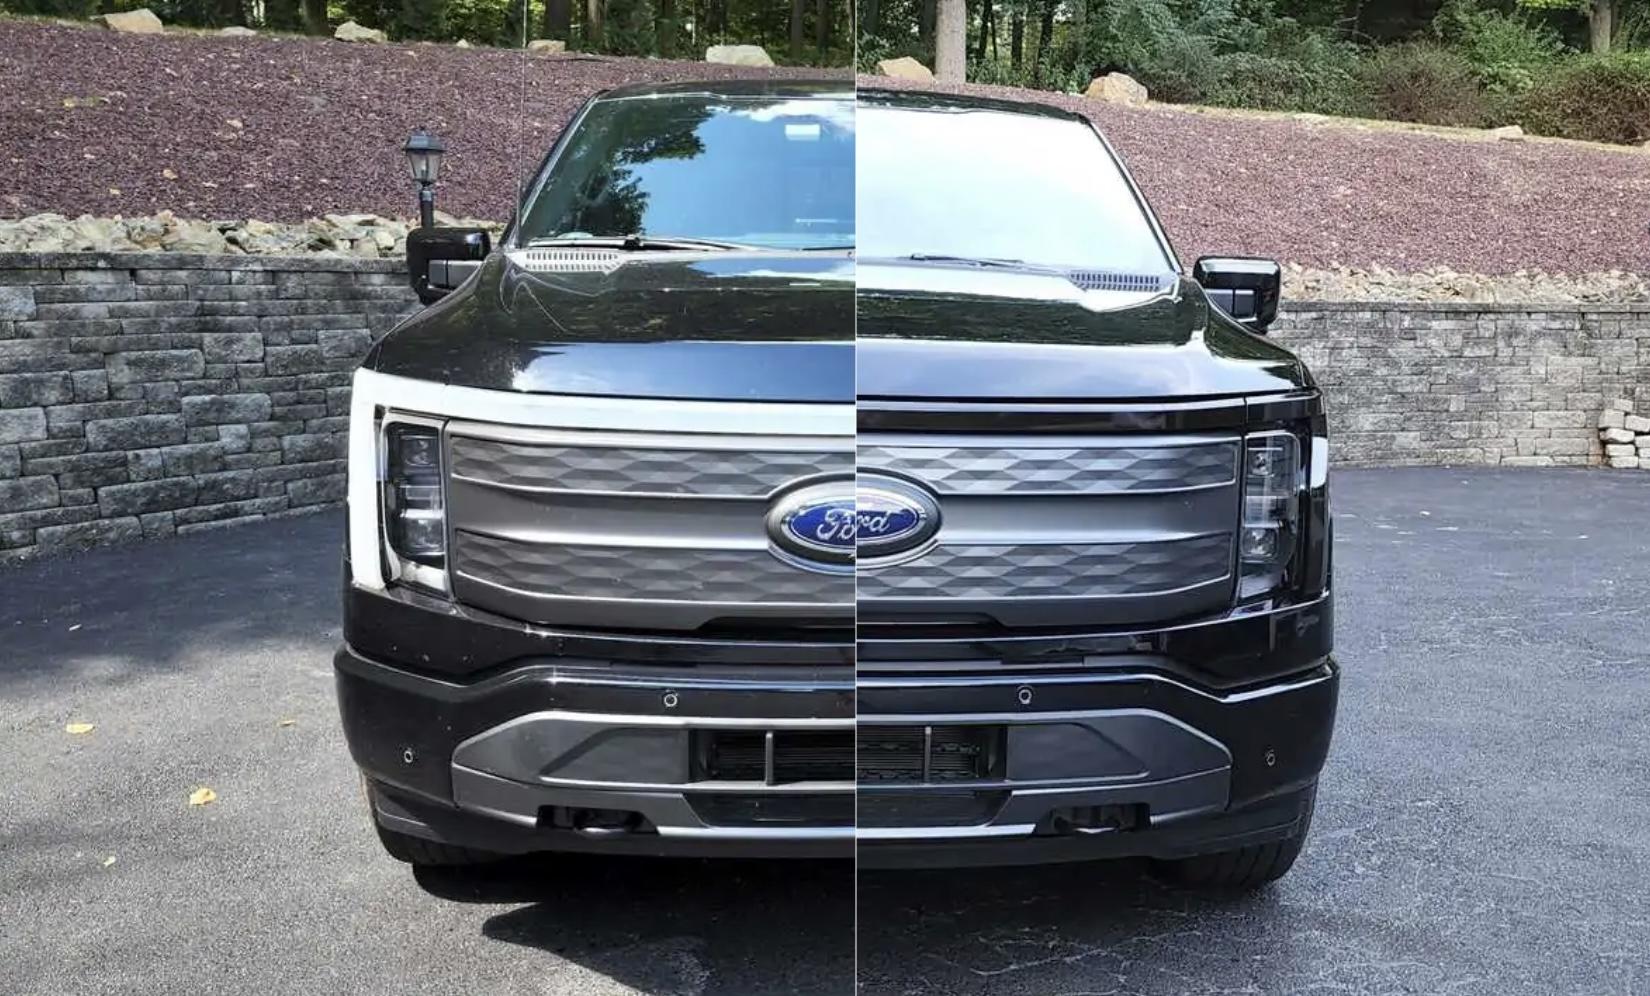 Ford F-150 Lightning Tinted front light bar on F150 Lightning using special tint made for lights ford-f-150-lightning-with-tinted-front-light-bar tint before after